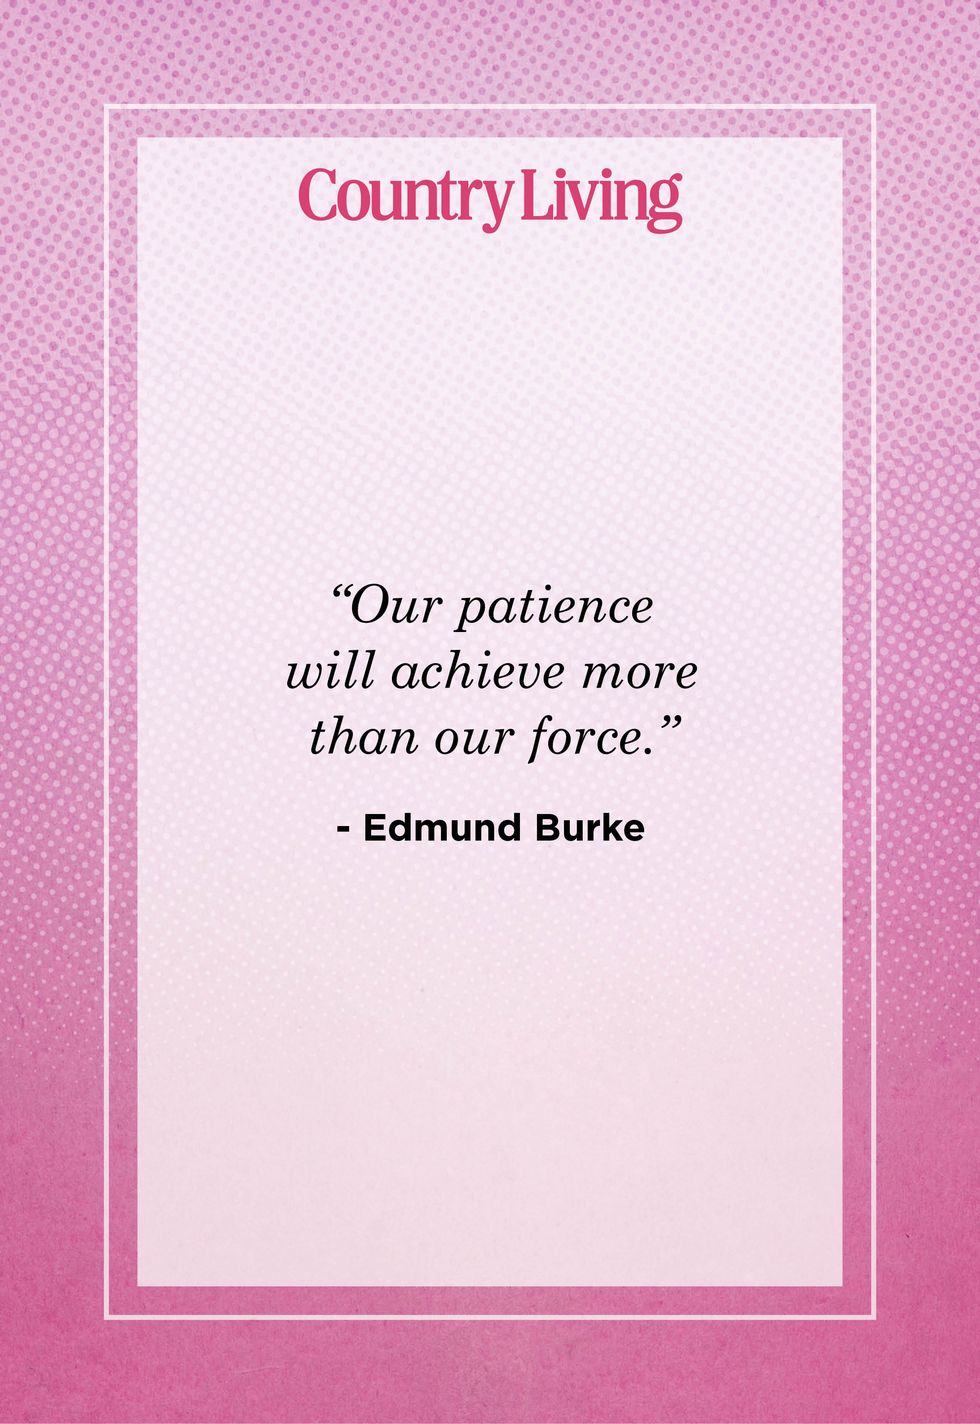 Quote About Patience By Edmund Burke